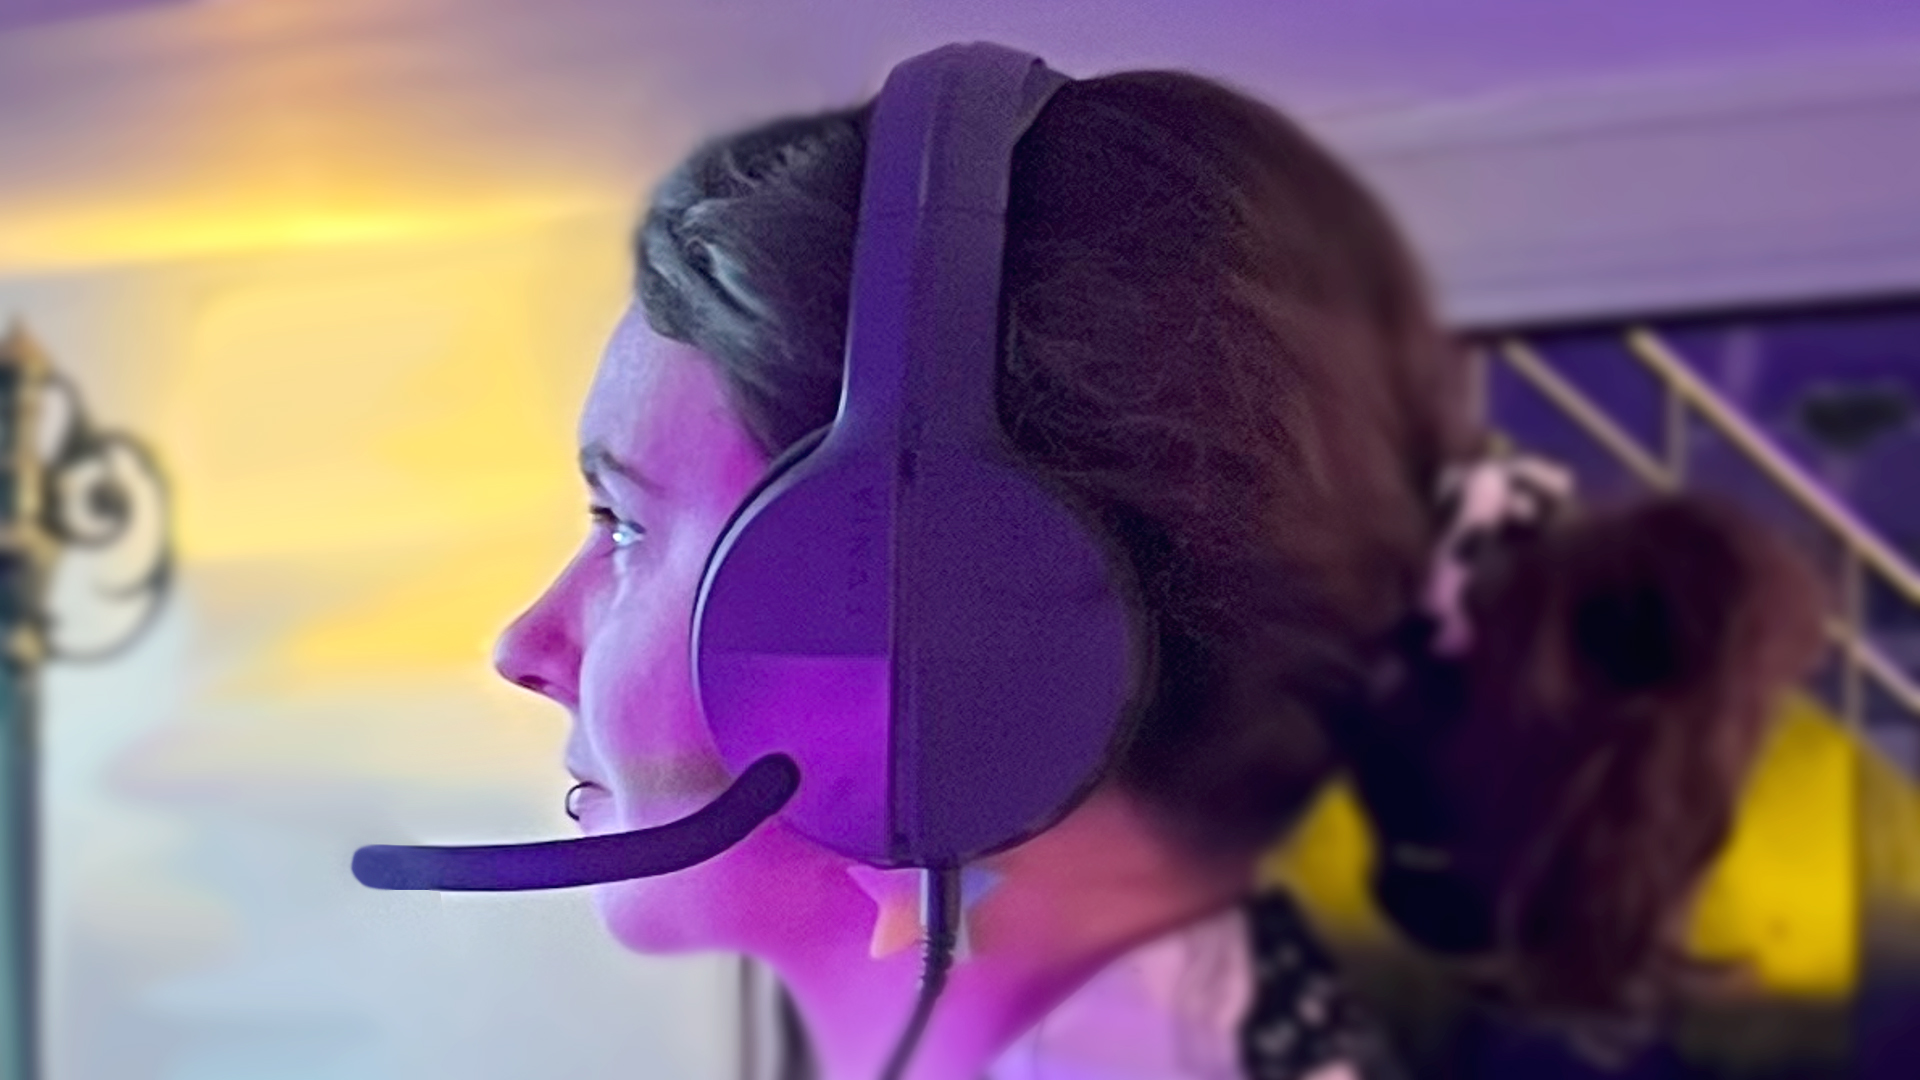 Katie Wickens wearing the low-end Evnia gaming headset